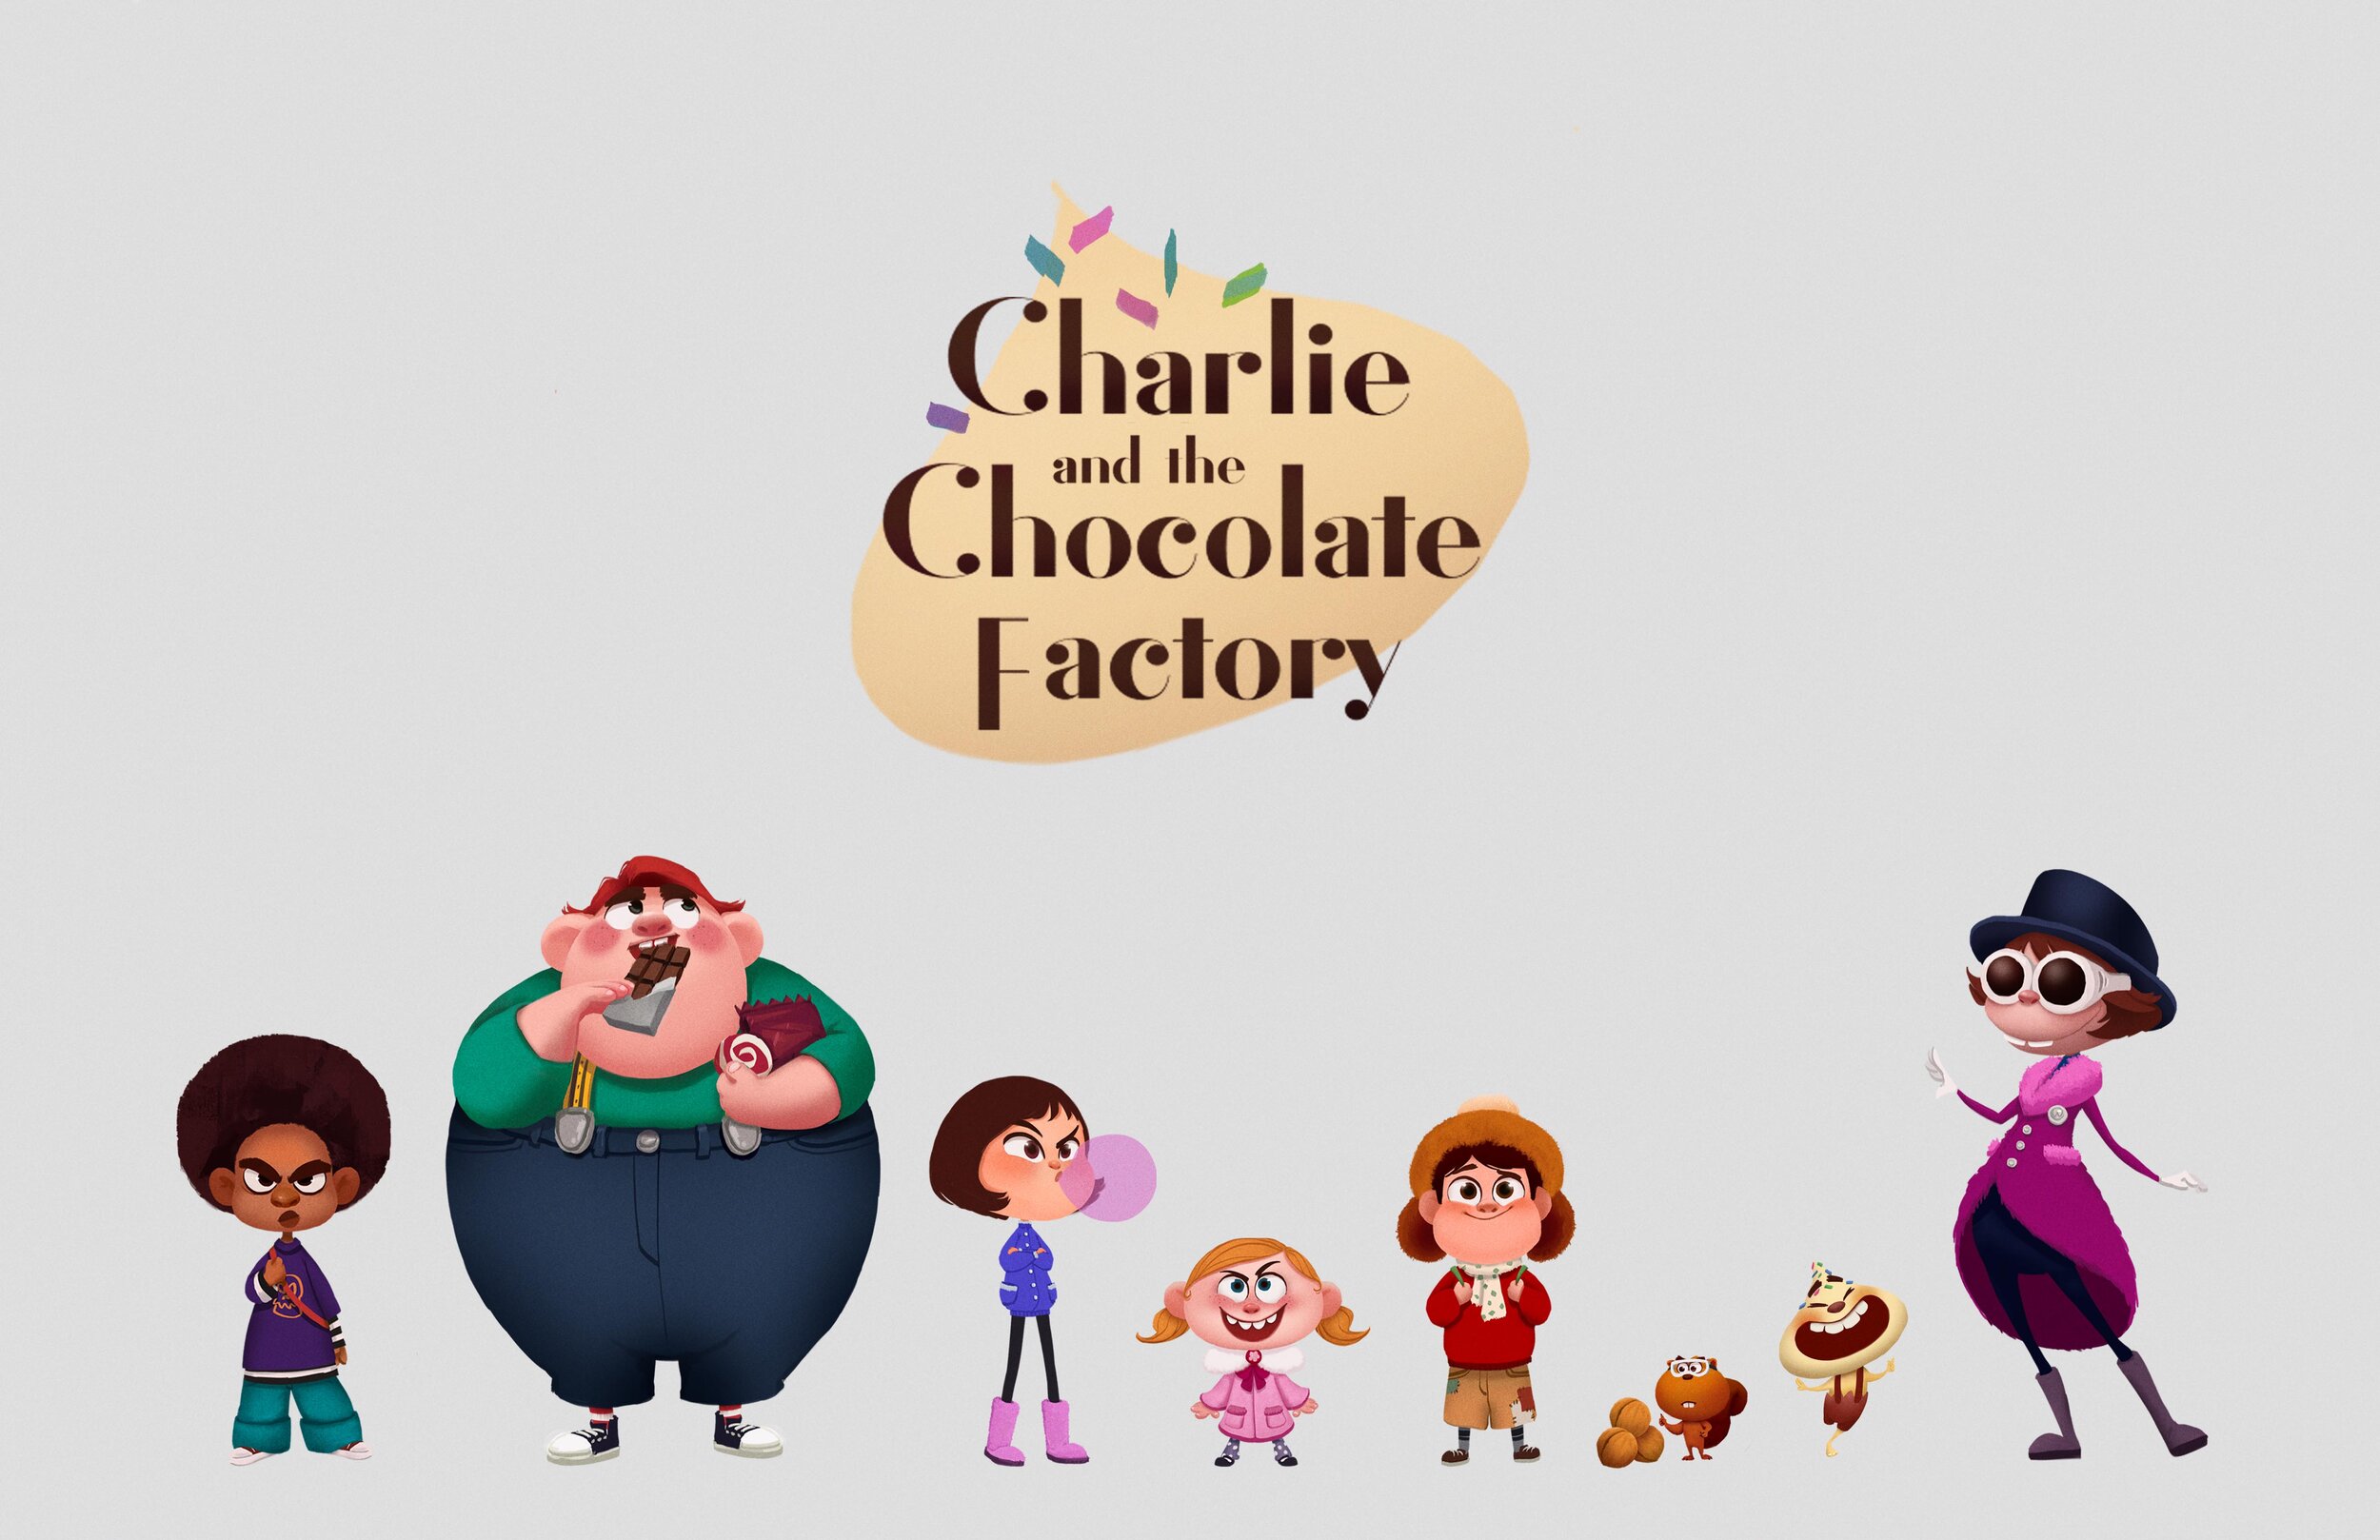 Charlie and the Chocolate Factory — YOONJEONG CHANG